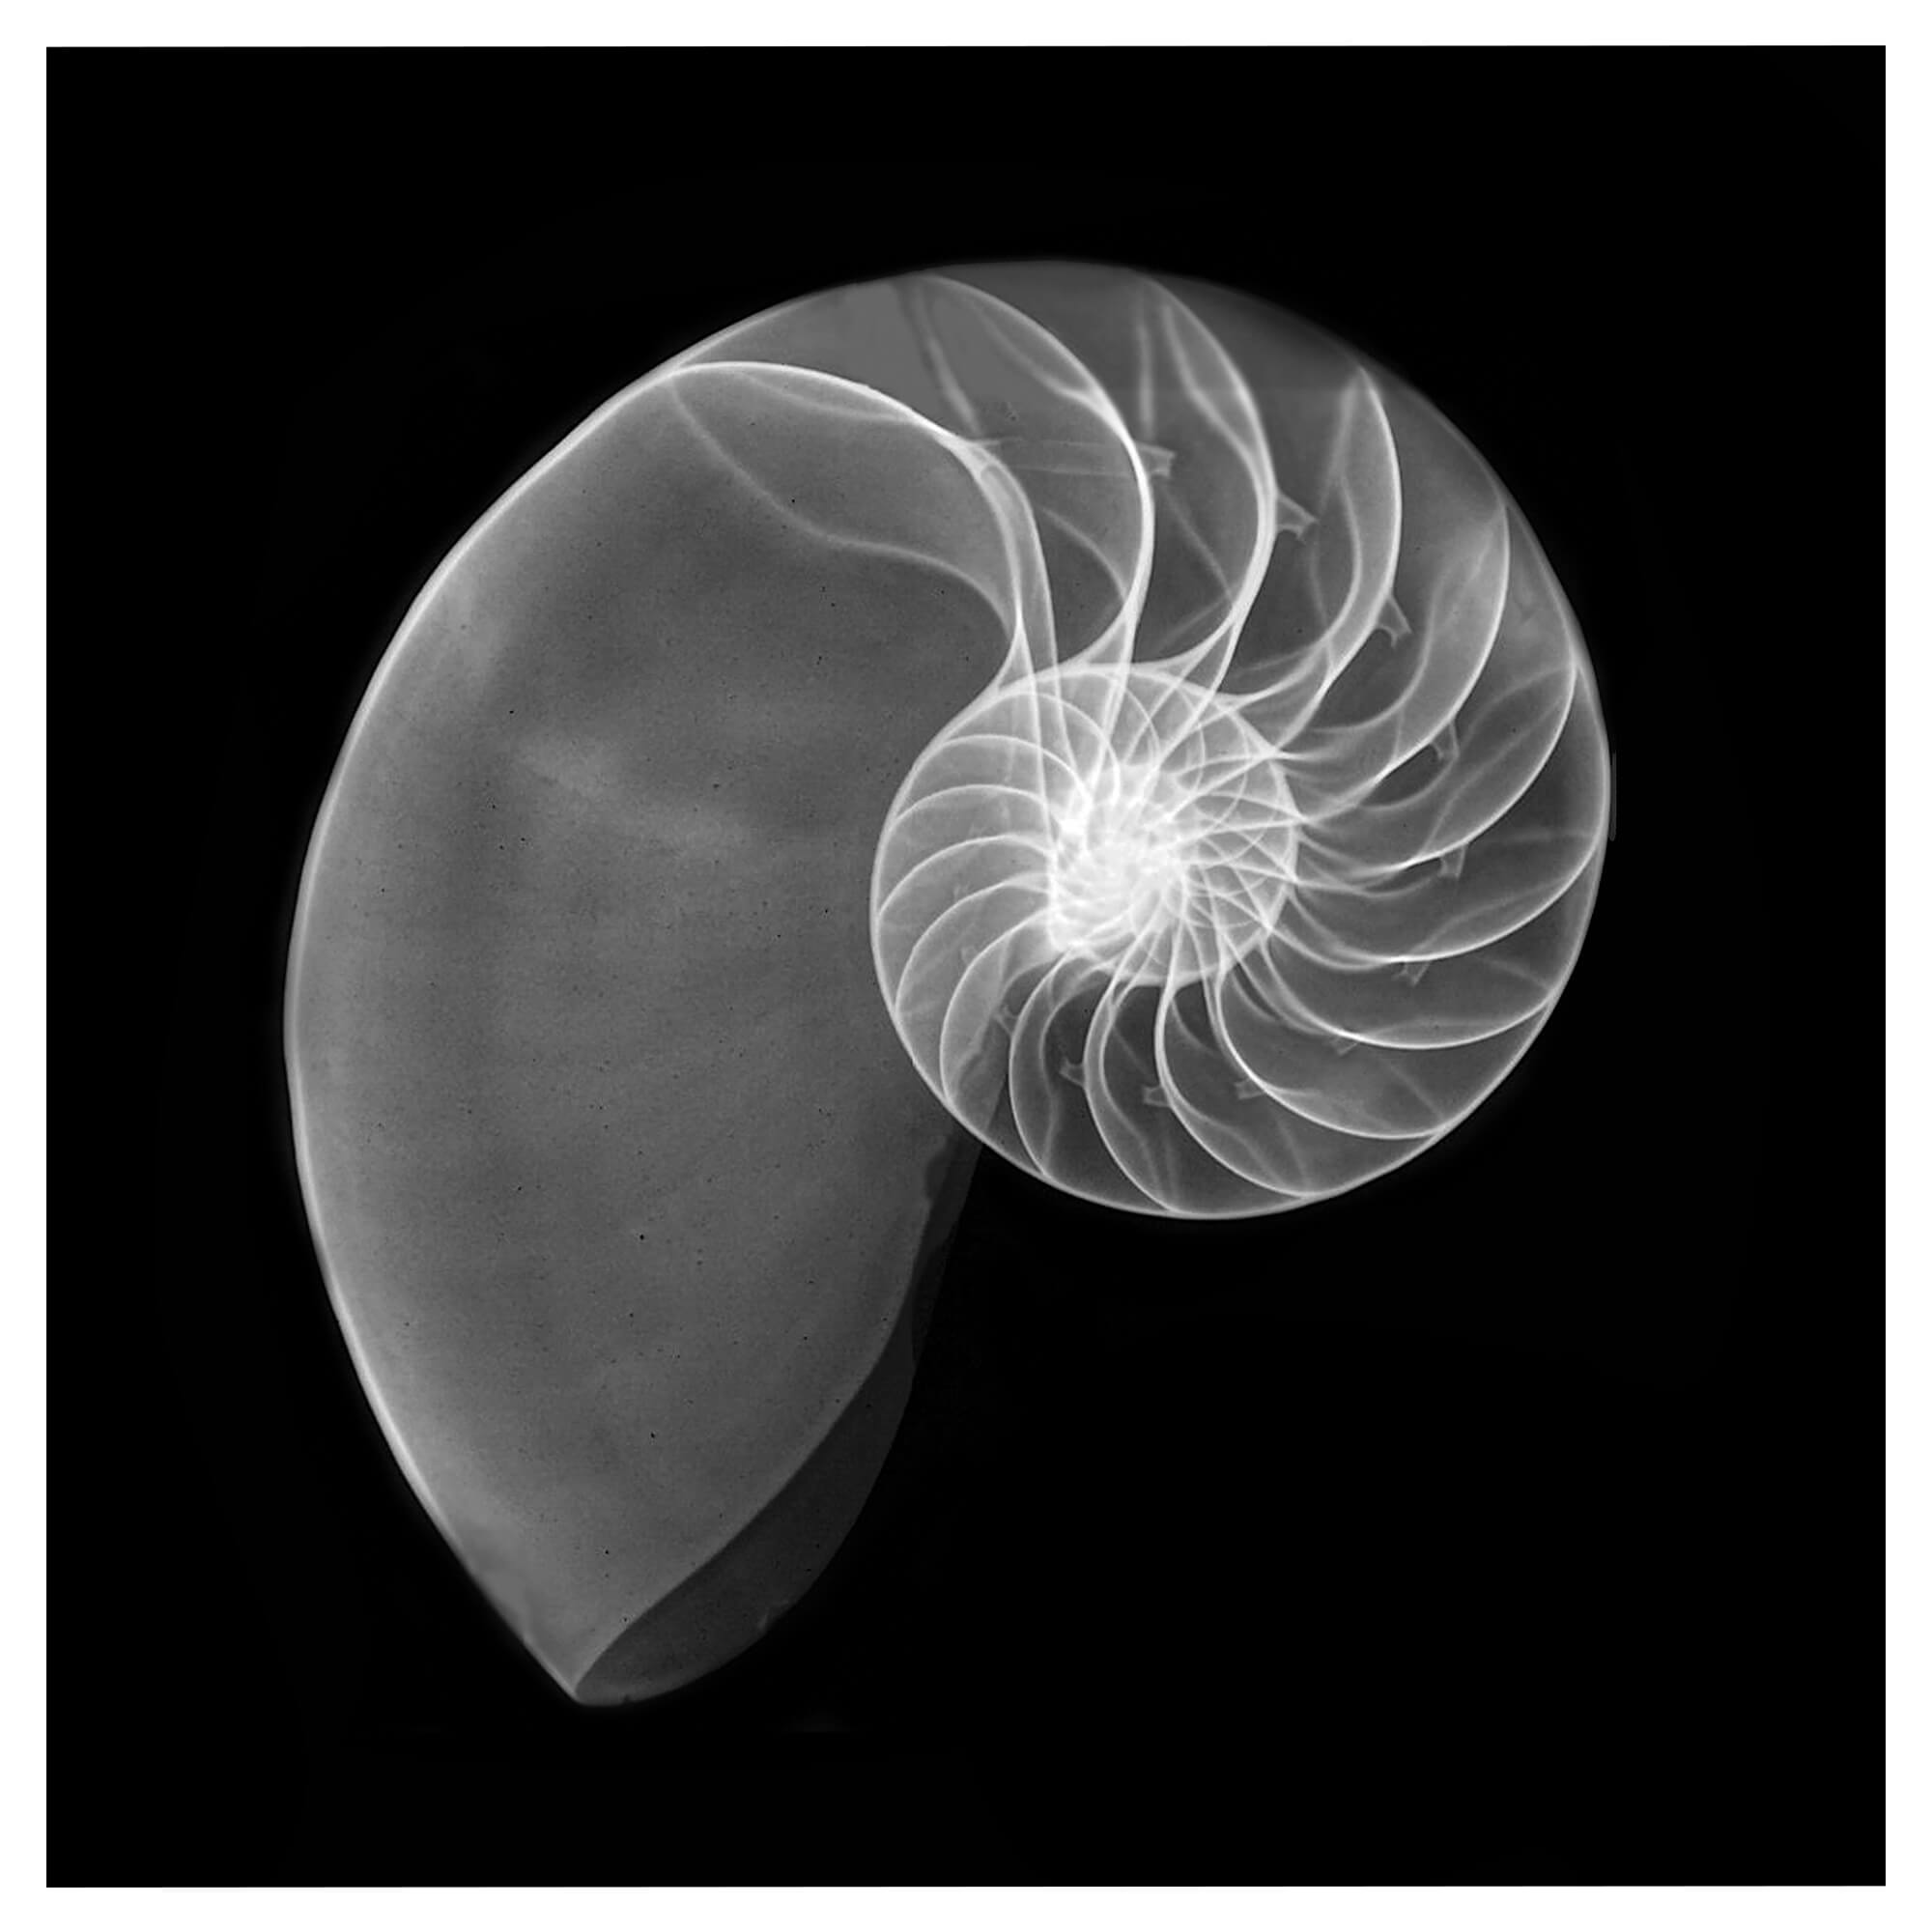 Art print featuring an X-ray of a breathtaking Nautilus shell by Hawaii artist Michelle Smith